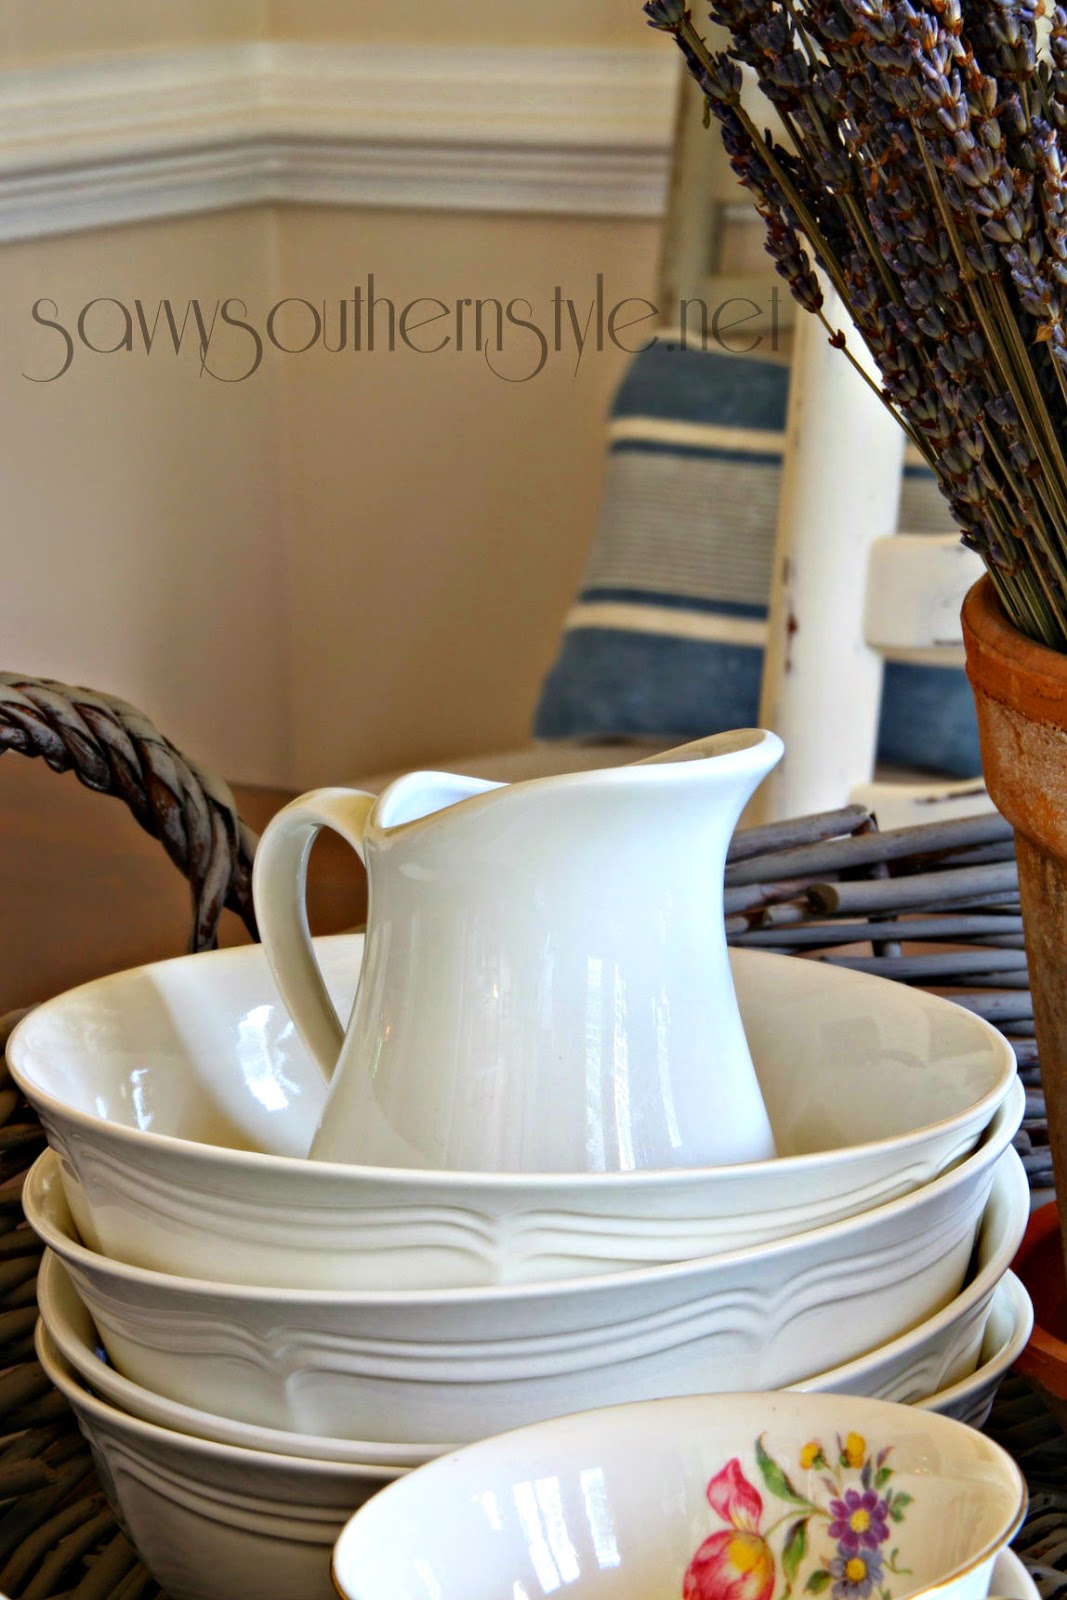 Savvy Southern Style : Collecting in Blue